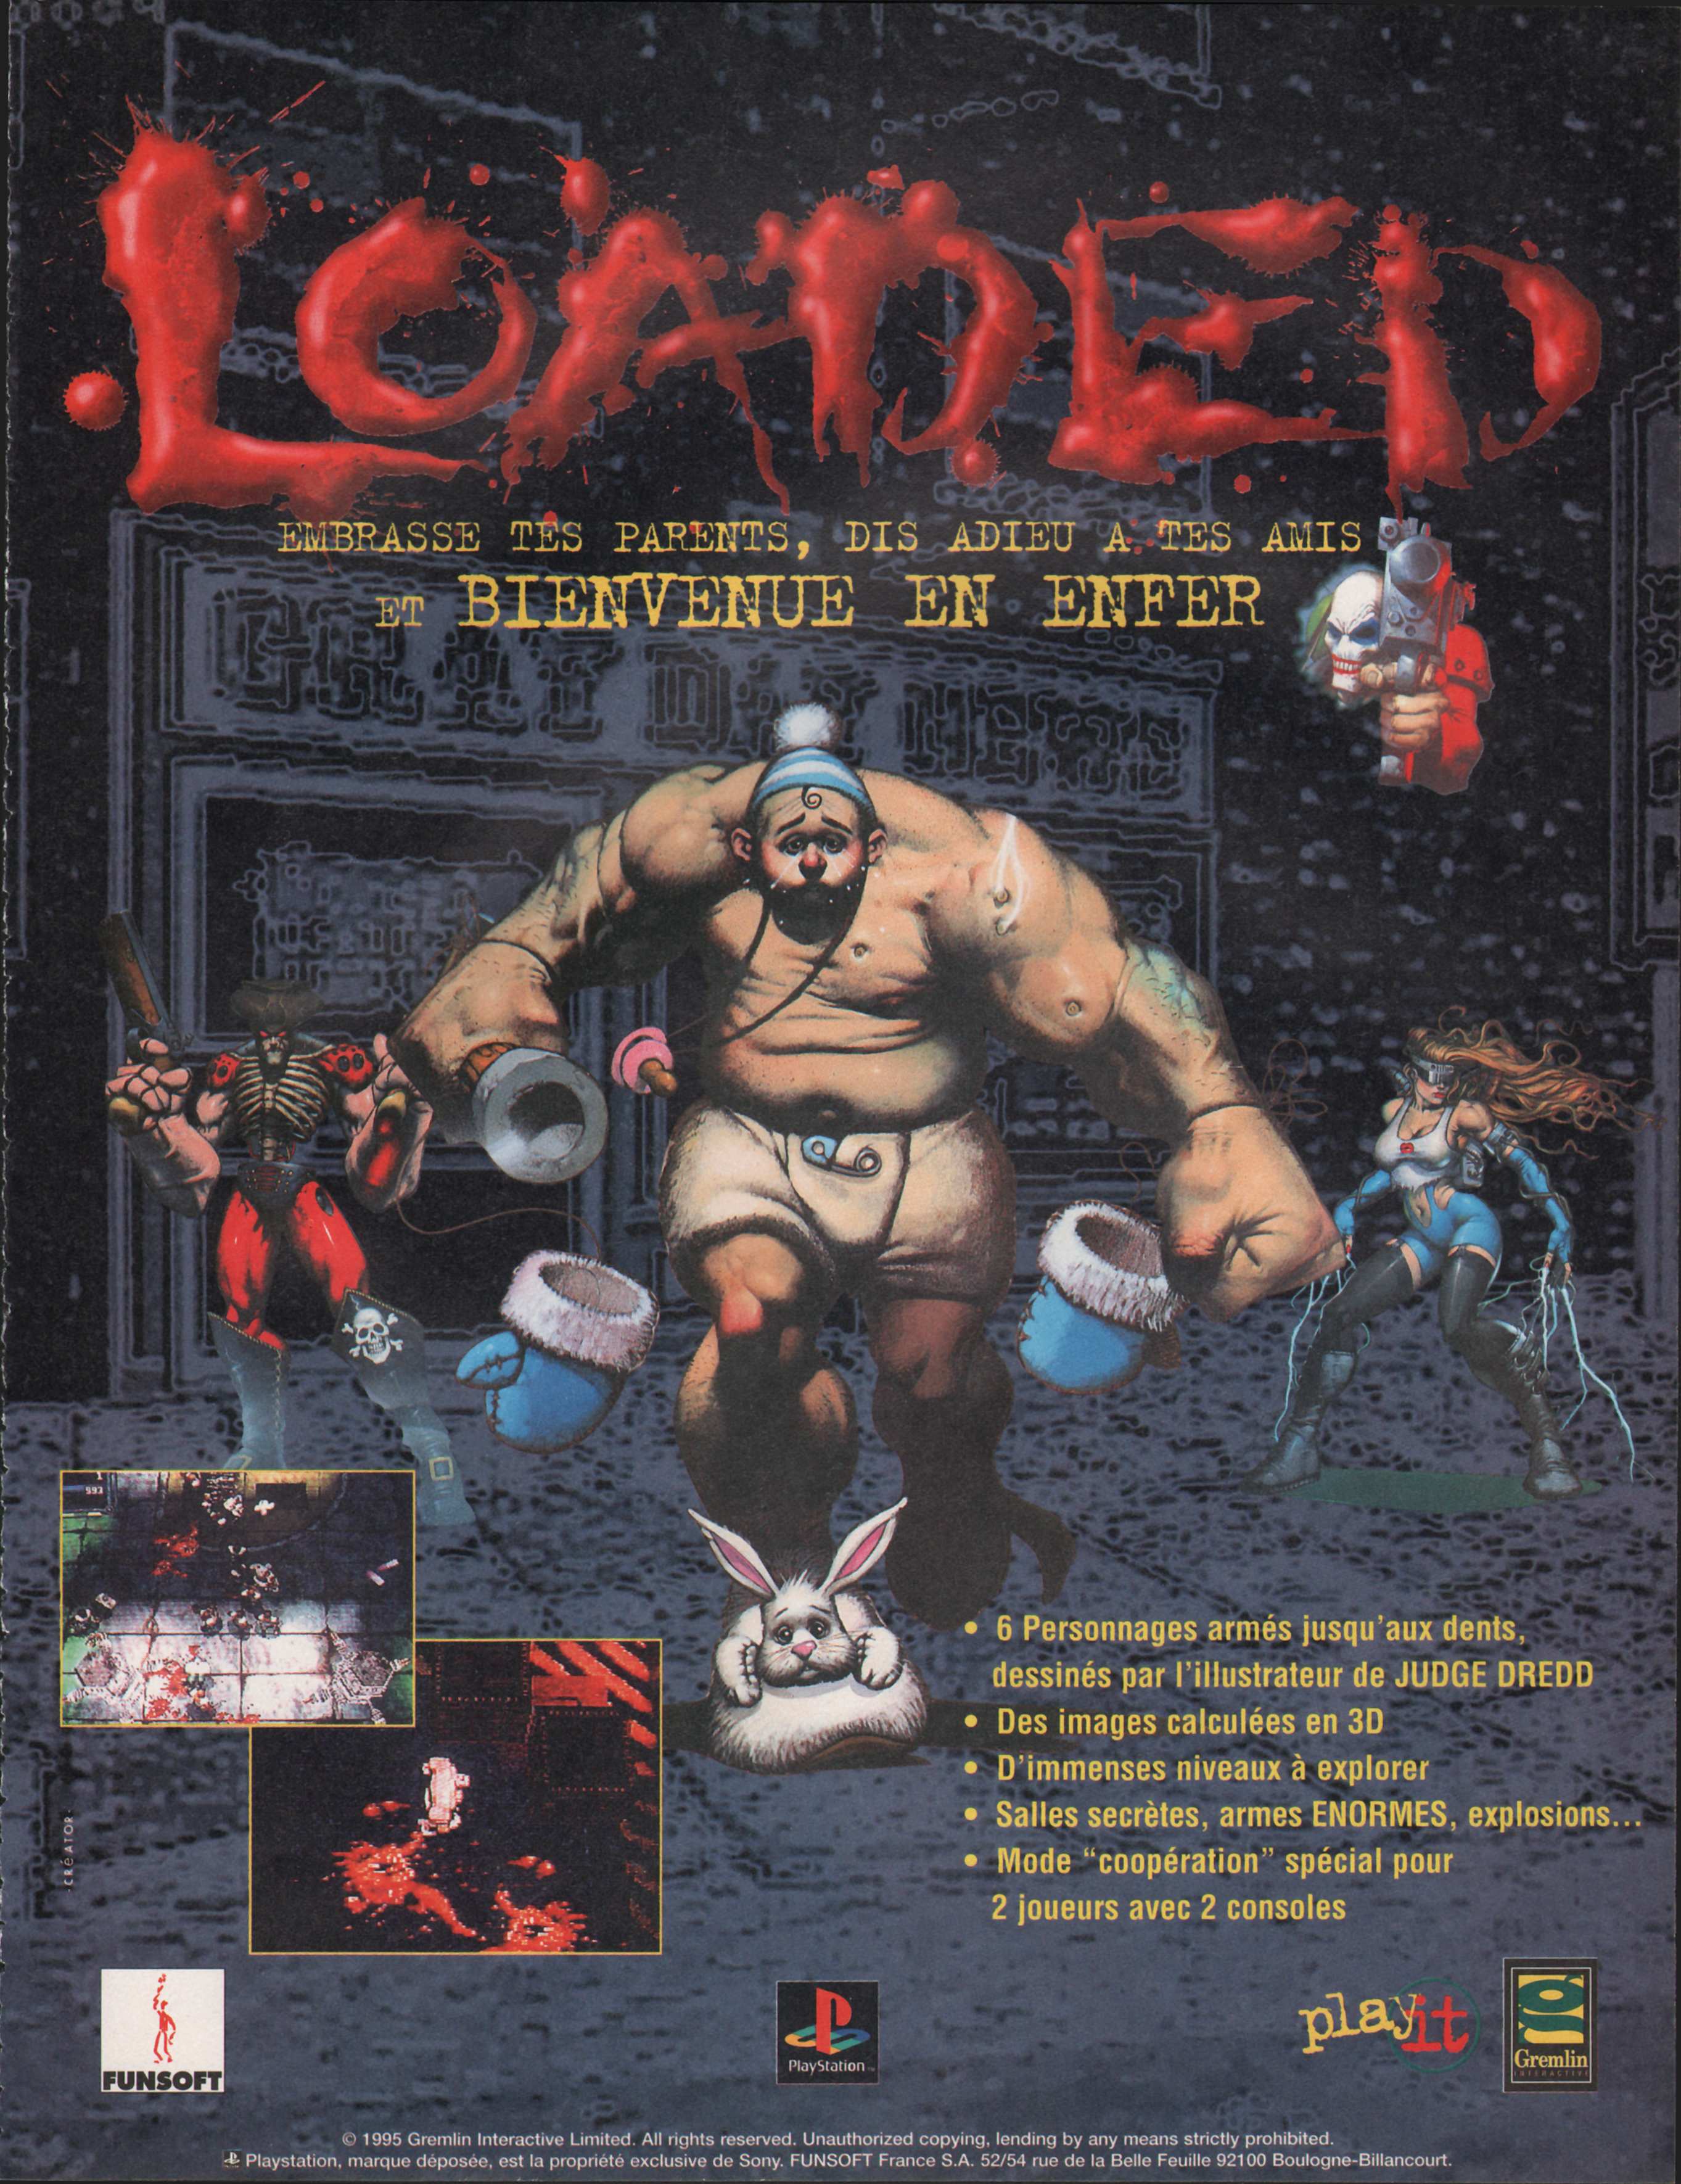 Loaded Playstation%20Magazine%20001%20-%20Page%20041%20(1995-12-1996-01)